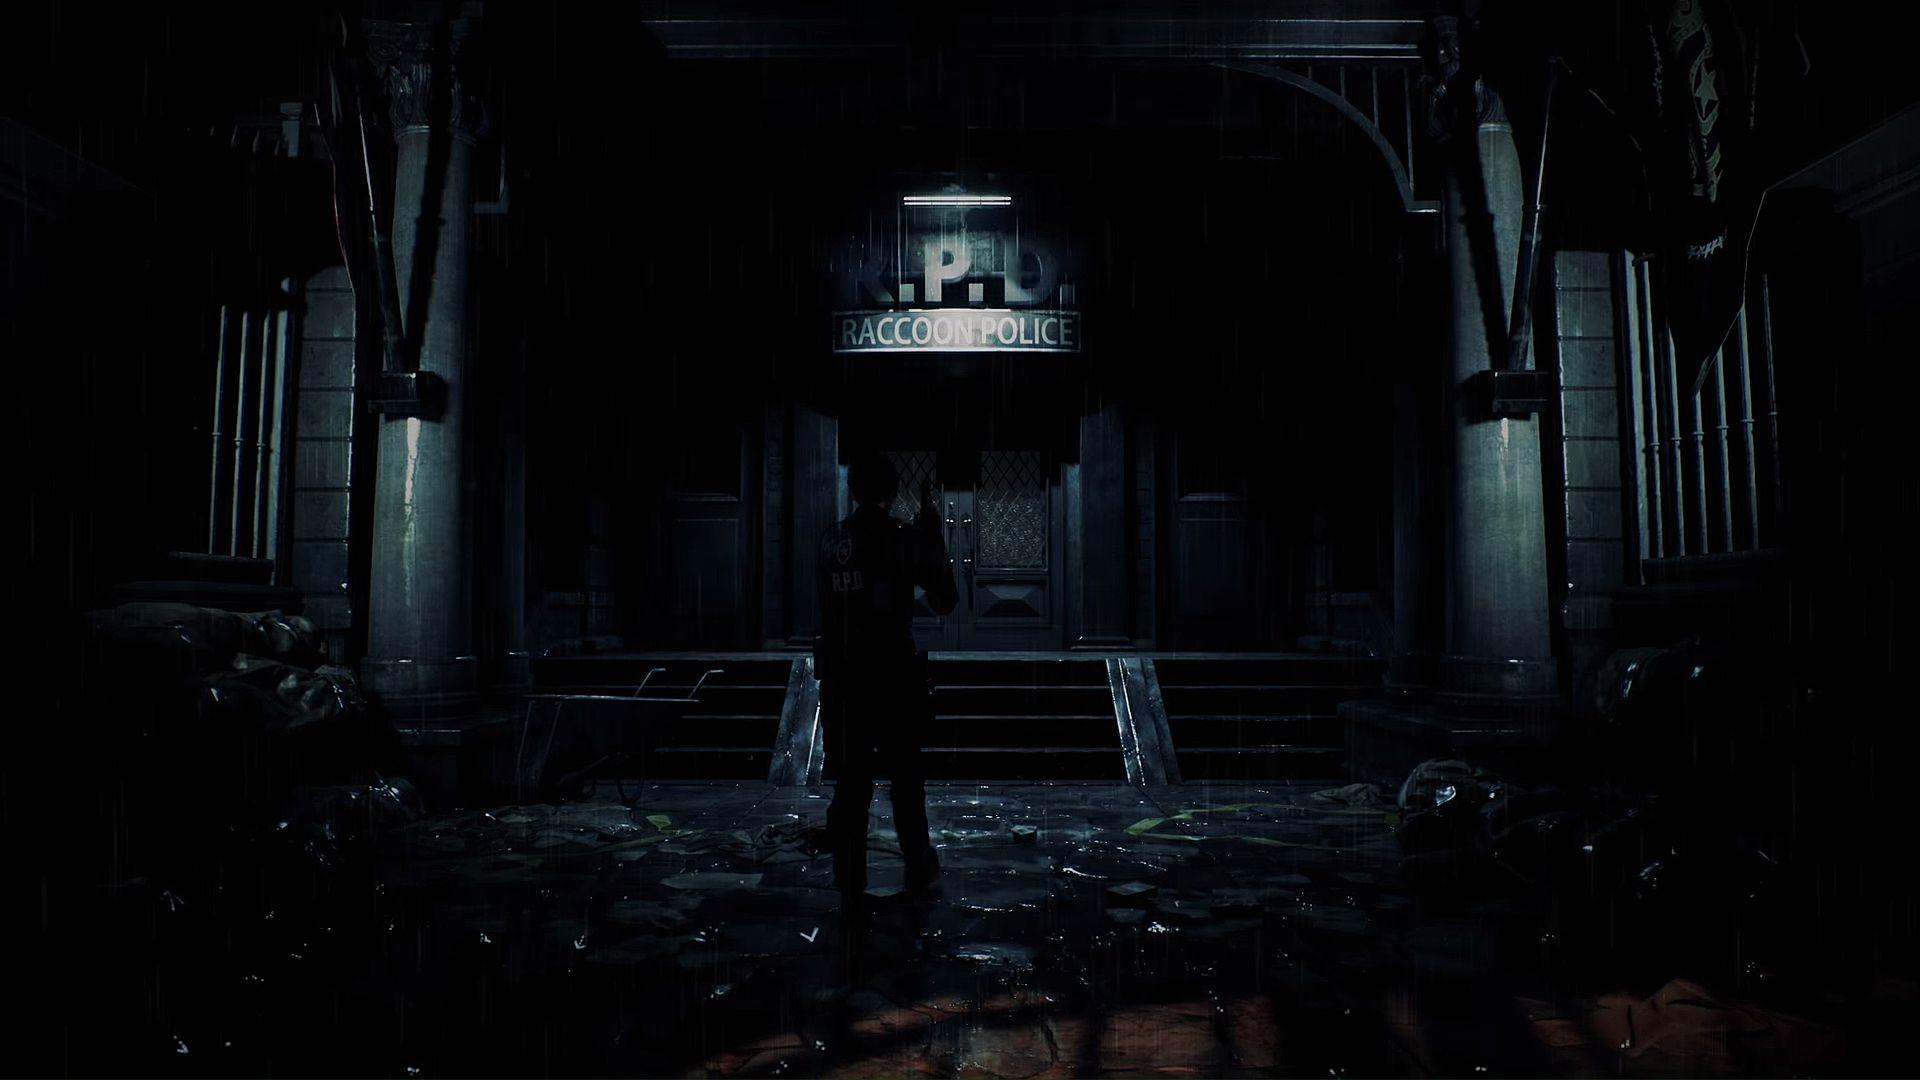 E3 2018: Resident Evil 2 remake revealed with incredible trailer